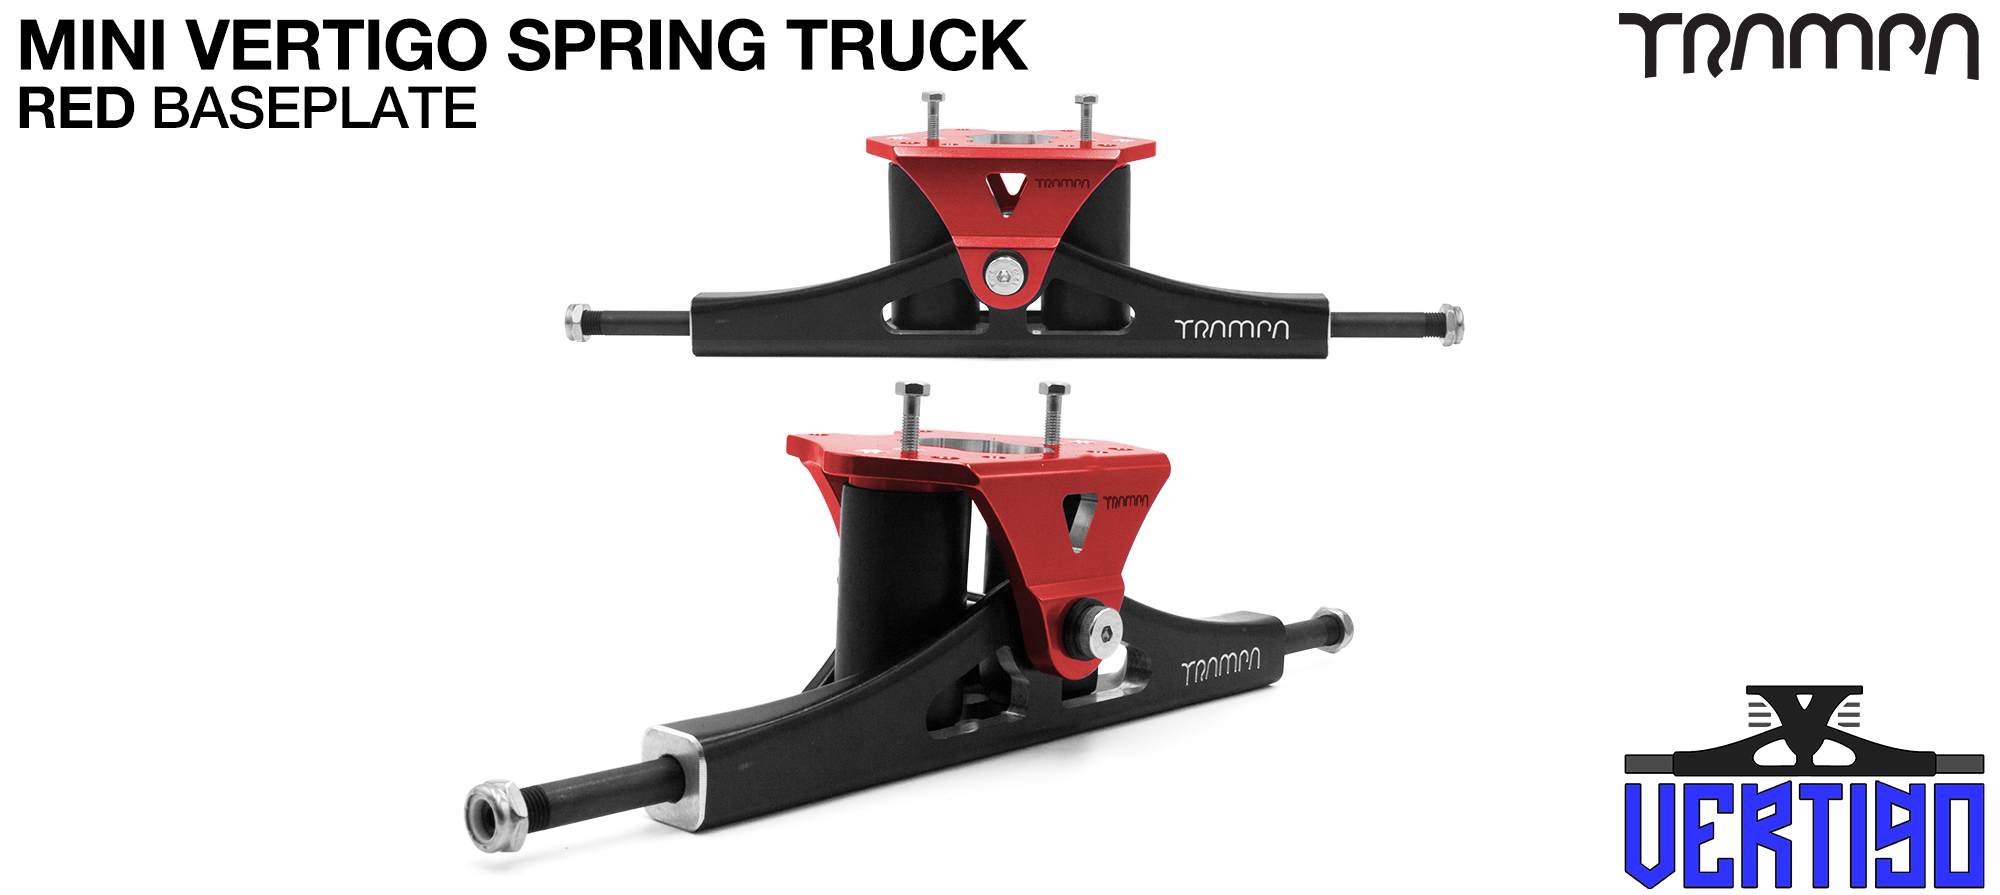 Mini VERTIGO TRAMPA TRUCKS - CNC FORGED Channel Hanger with 9.525mm HOLLOW Steel Axle CNC Baseplate Stainless Steel Kingpin - RED